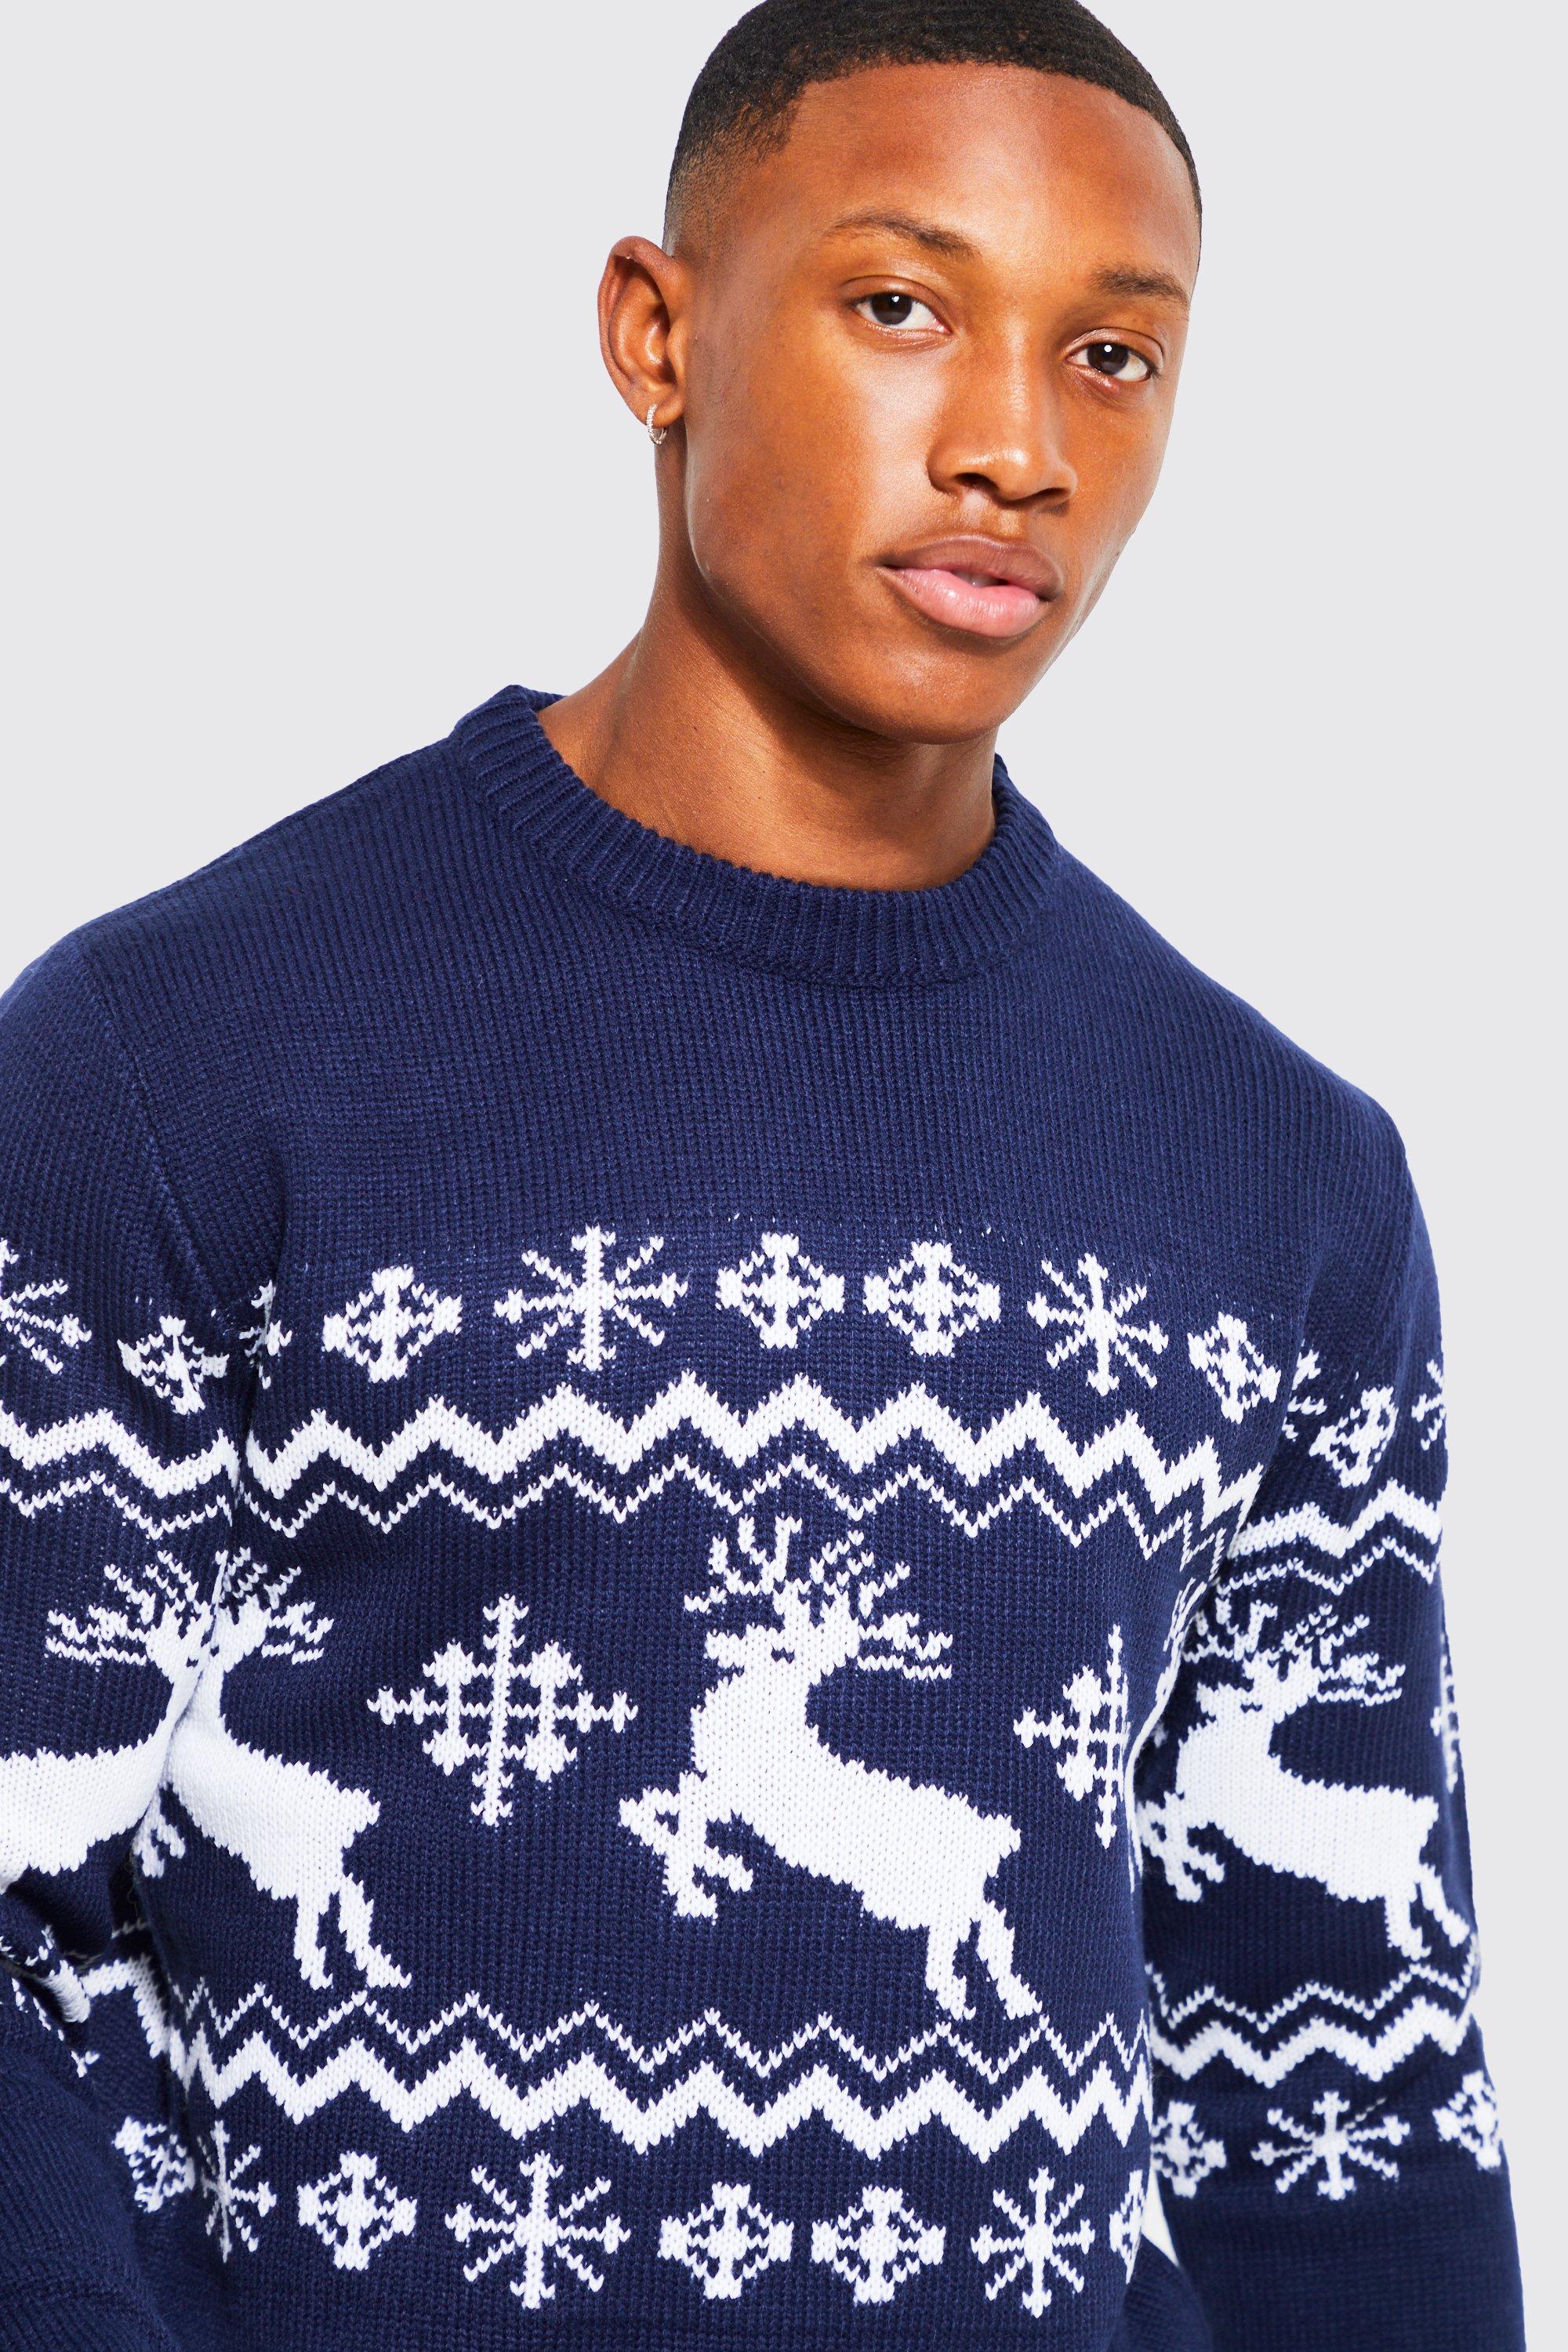 Men's Christmas Sweaters Funny Xmas Sweaters For Men Boohoo USA | Christmas  Men Deer Print Knitted Jumper Sweater Round Neck Pullover Casual Tops  Sweatshirt 